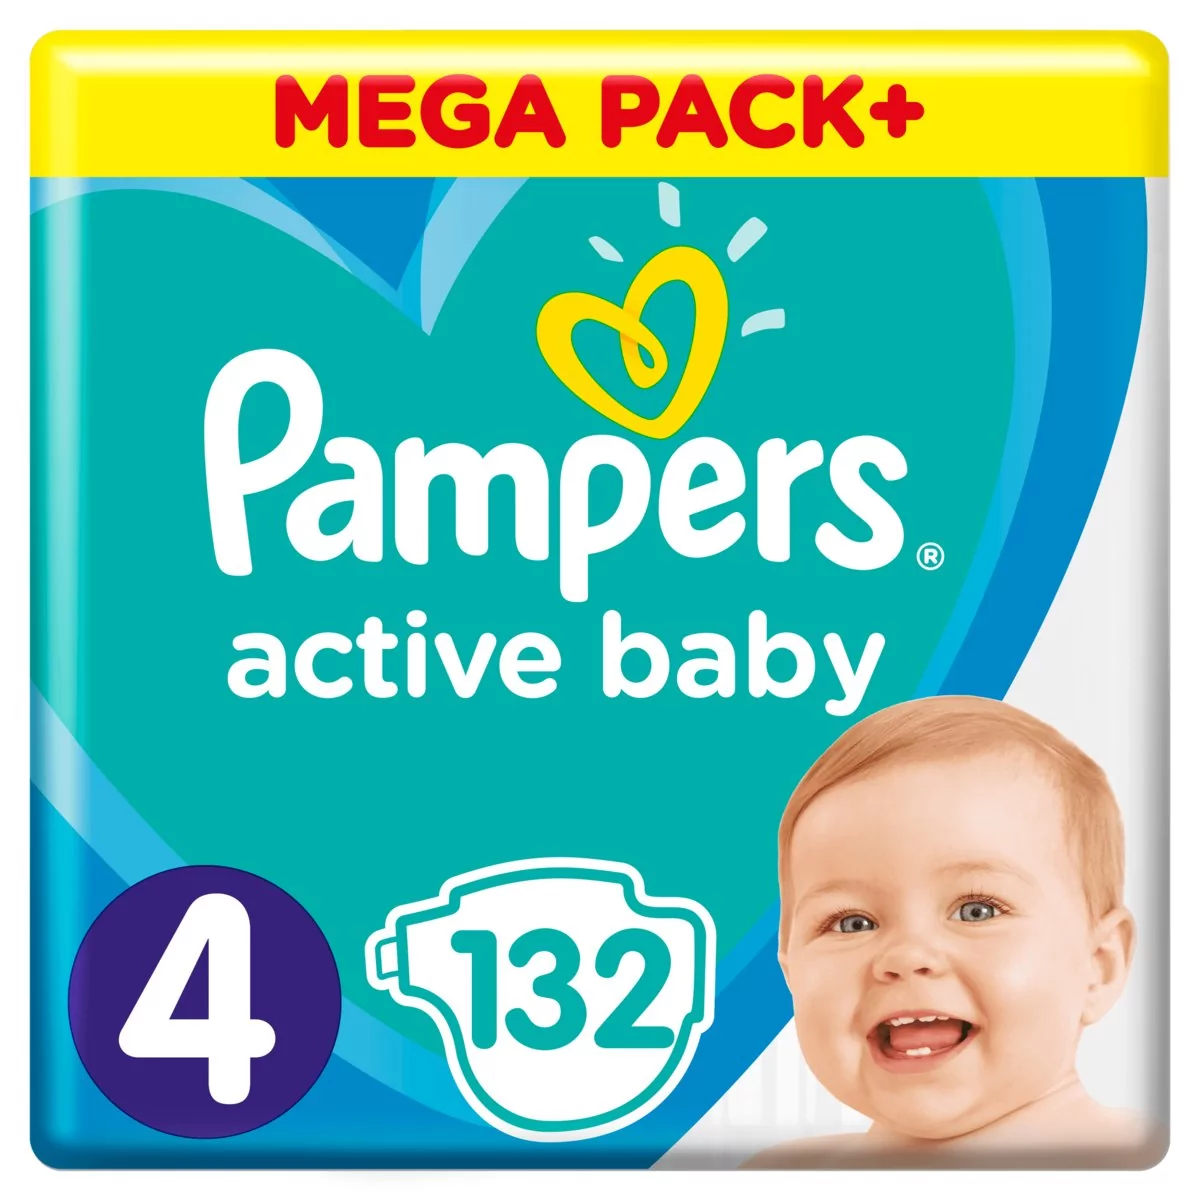 Pampers Active Baby 4 132 szt.